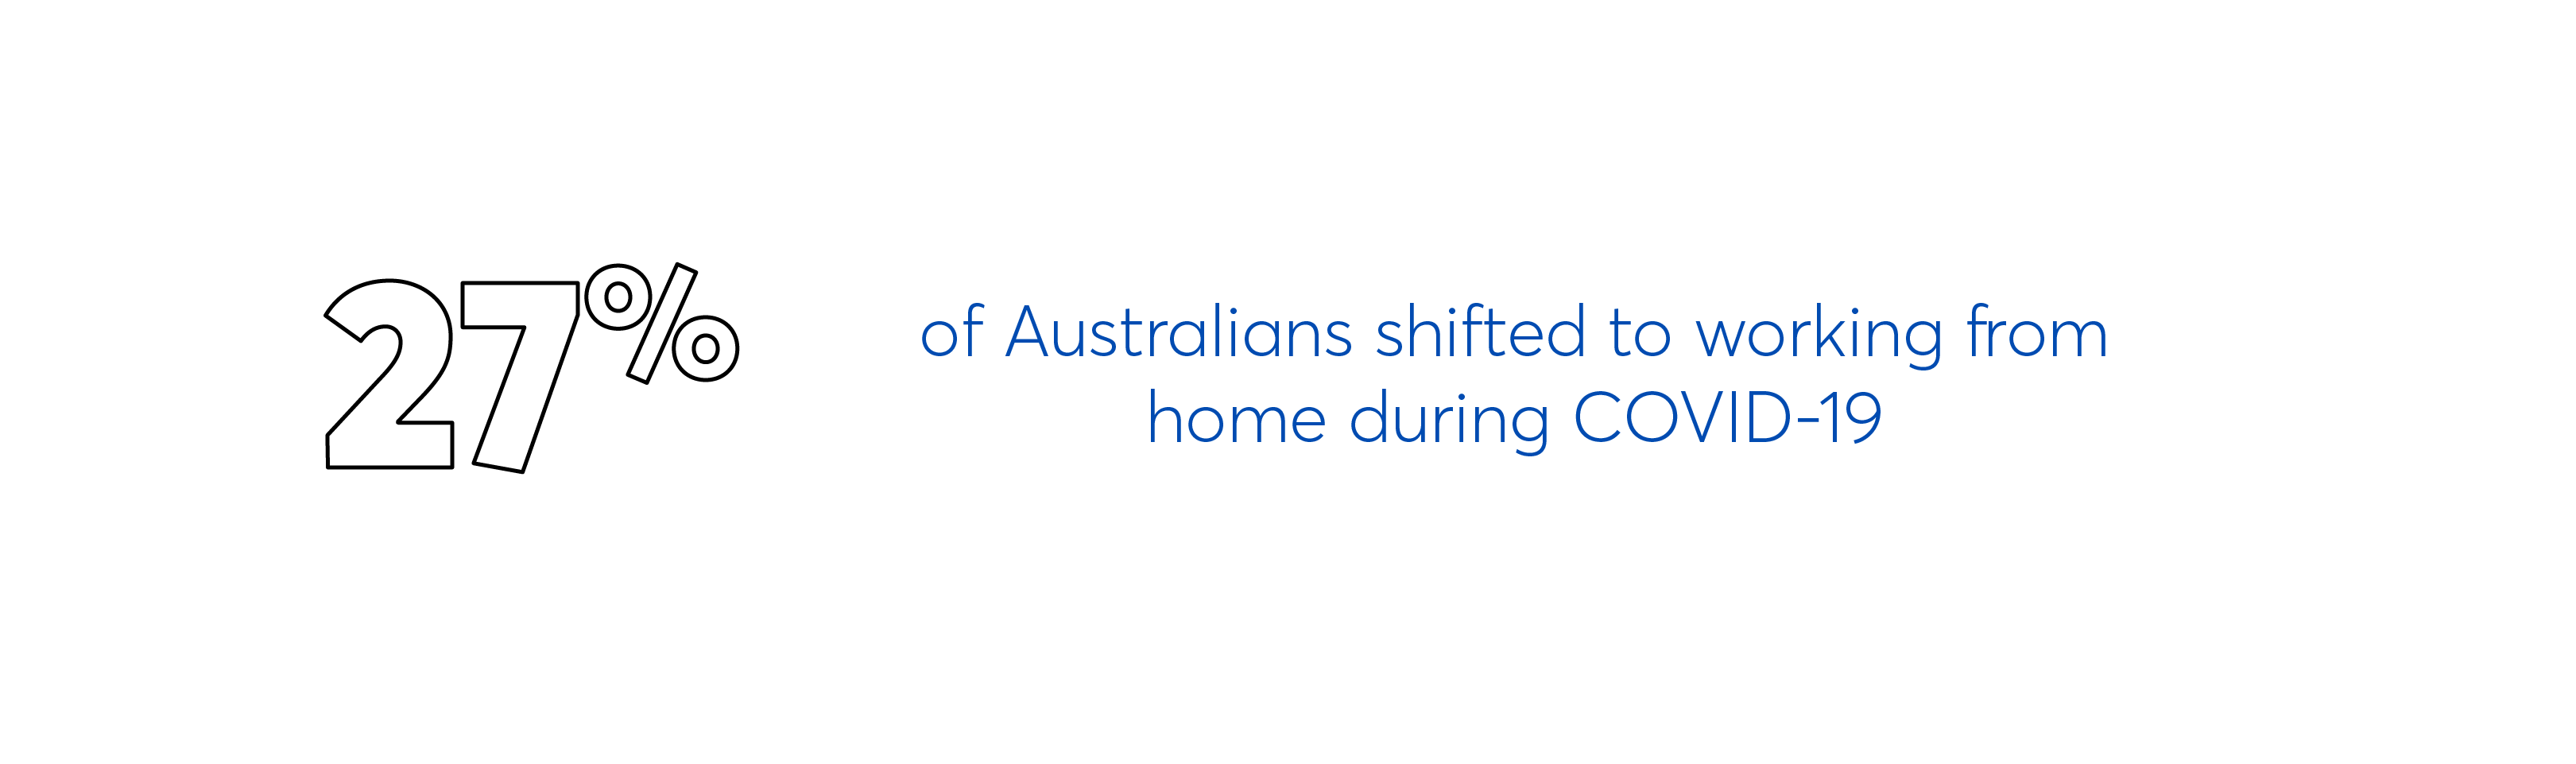 Australians shifted to working from home during COVID-19